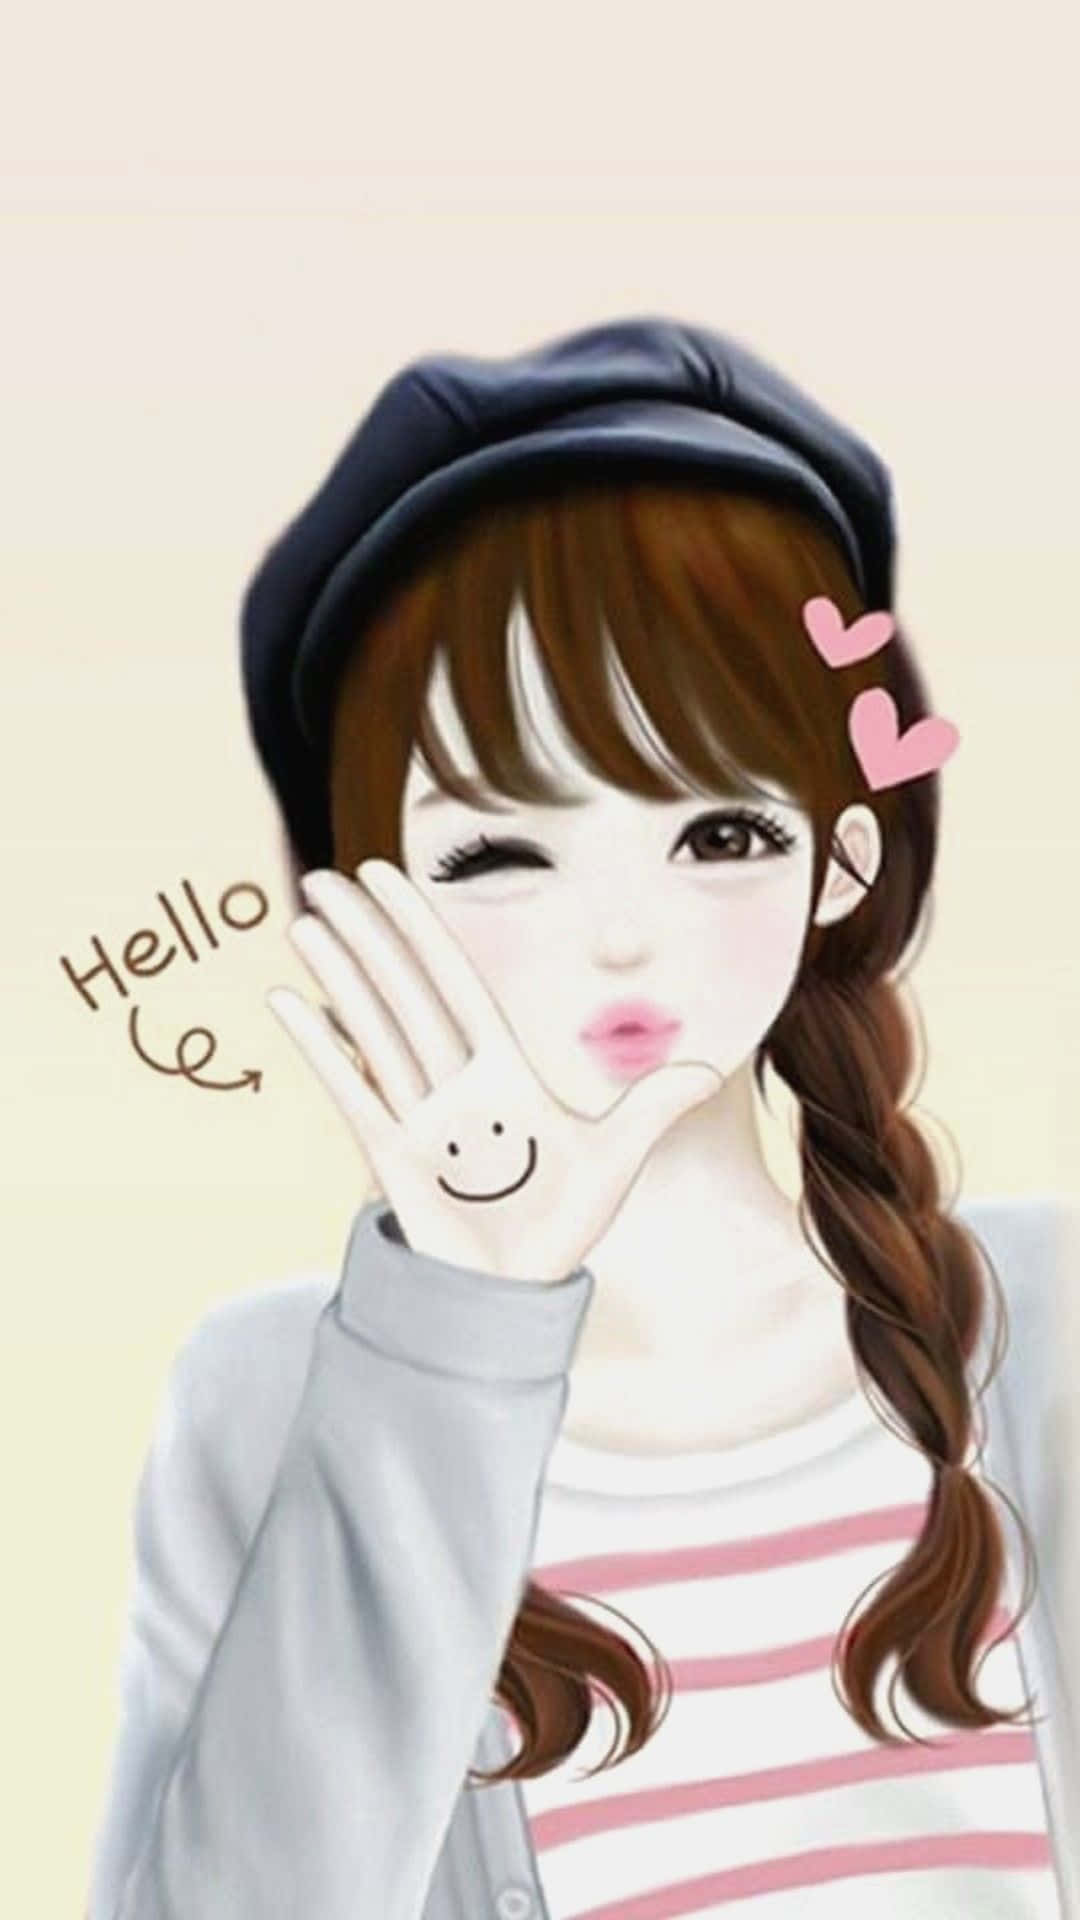 Korean Anime Girl With Smiley Face On Hand Background